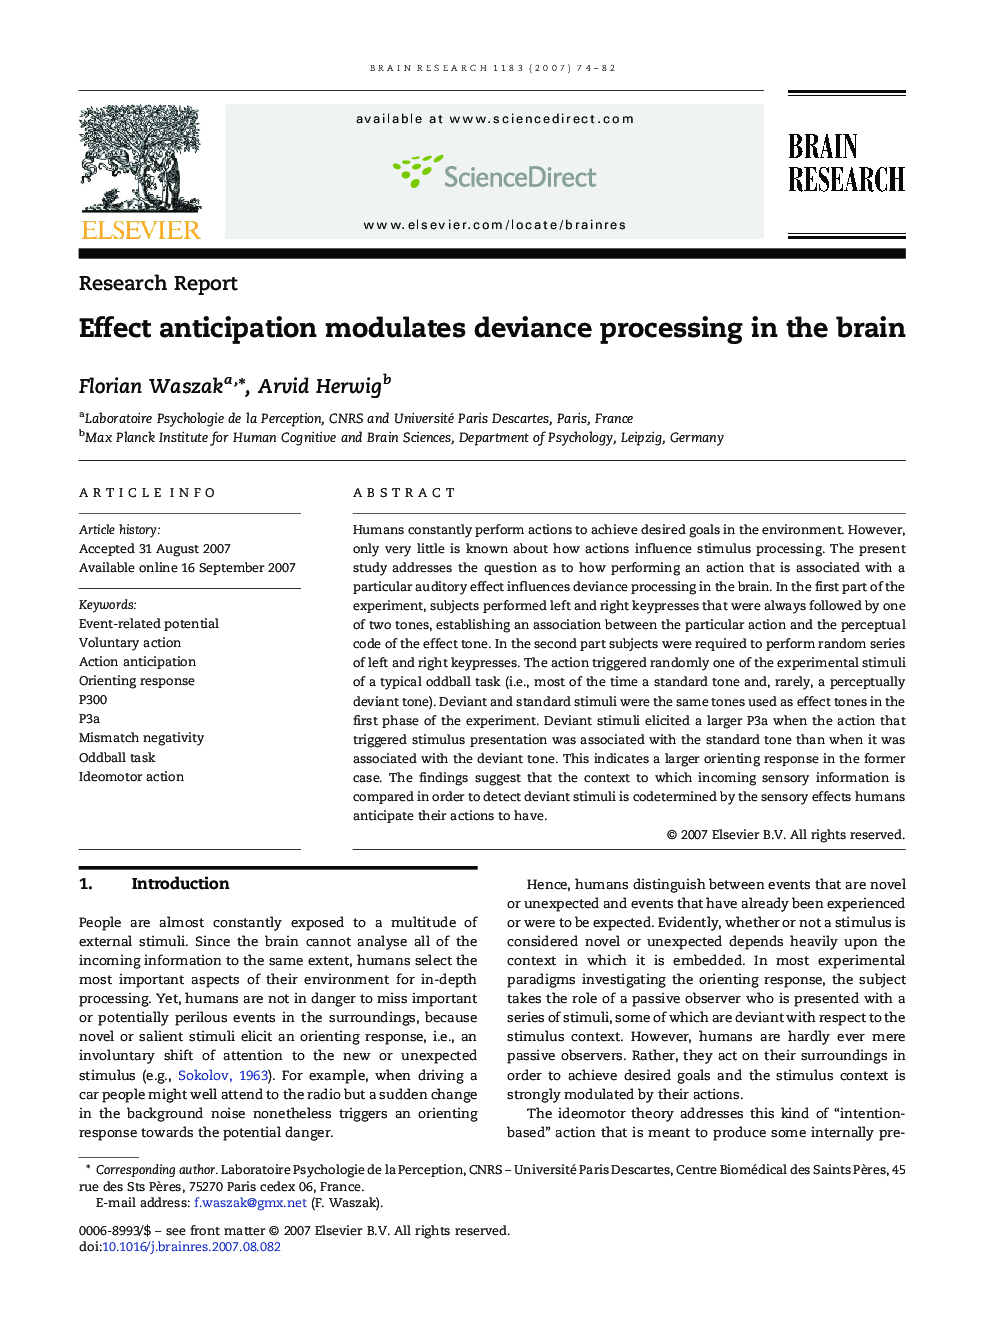 Effect anticipation modulates deviance processing in the brain